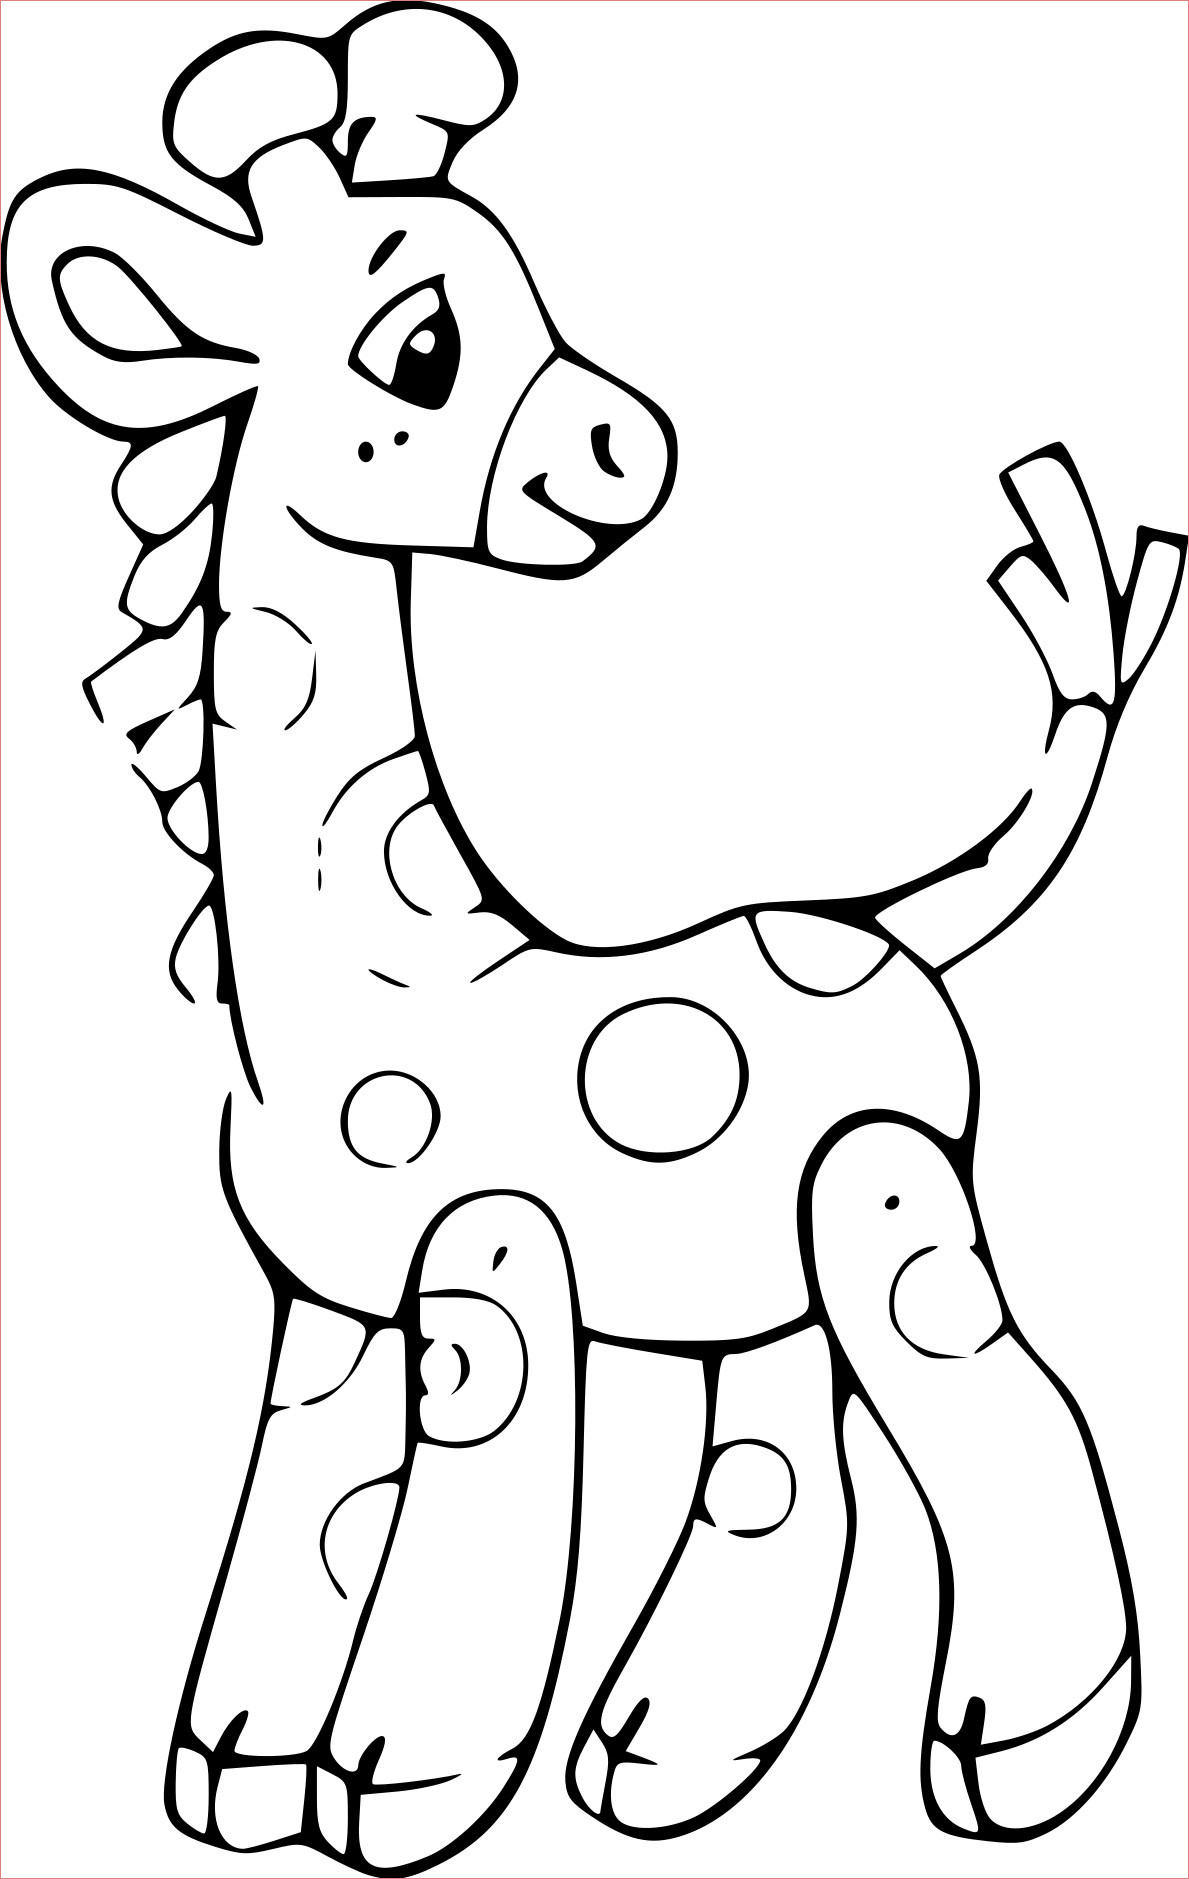 11 premier coloriage girafe images